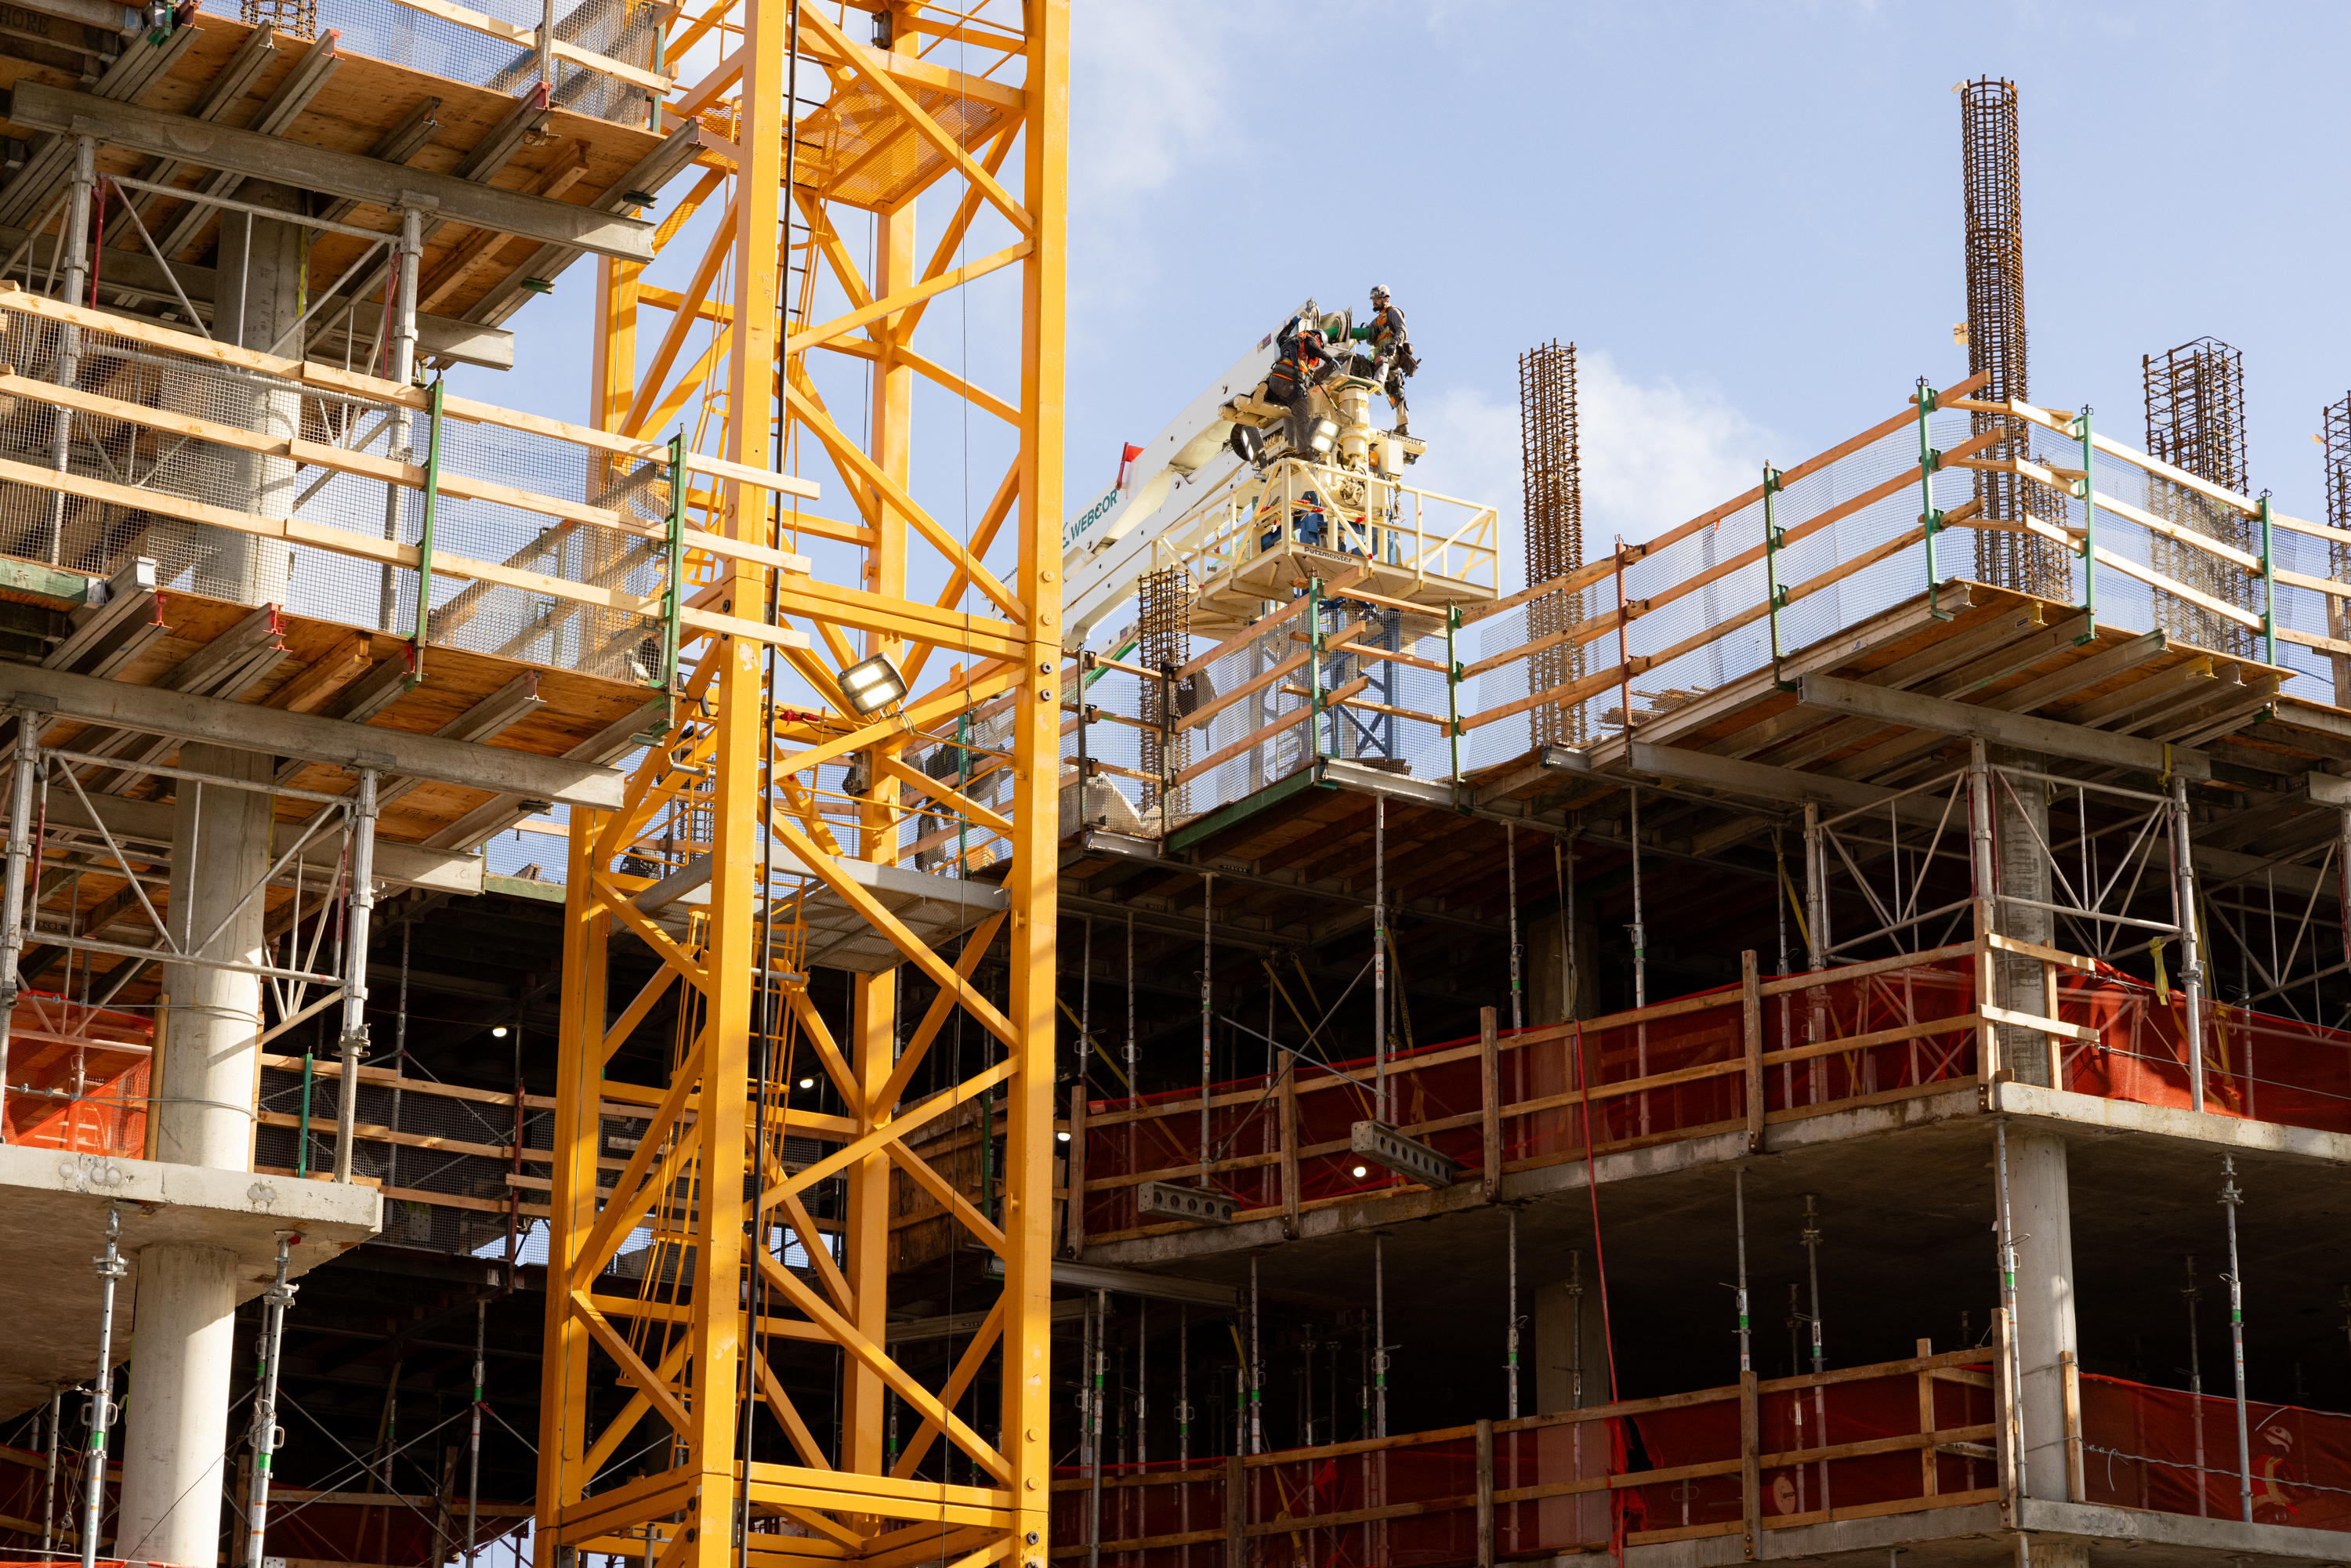 Construction site with a yellow crane, workers on scaffolding, and concrete building floors under a clear sky.